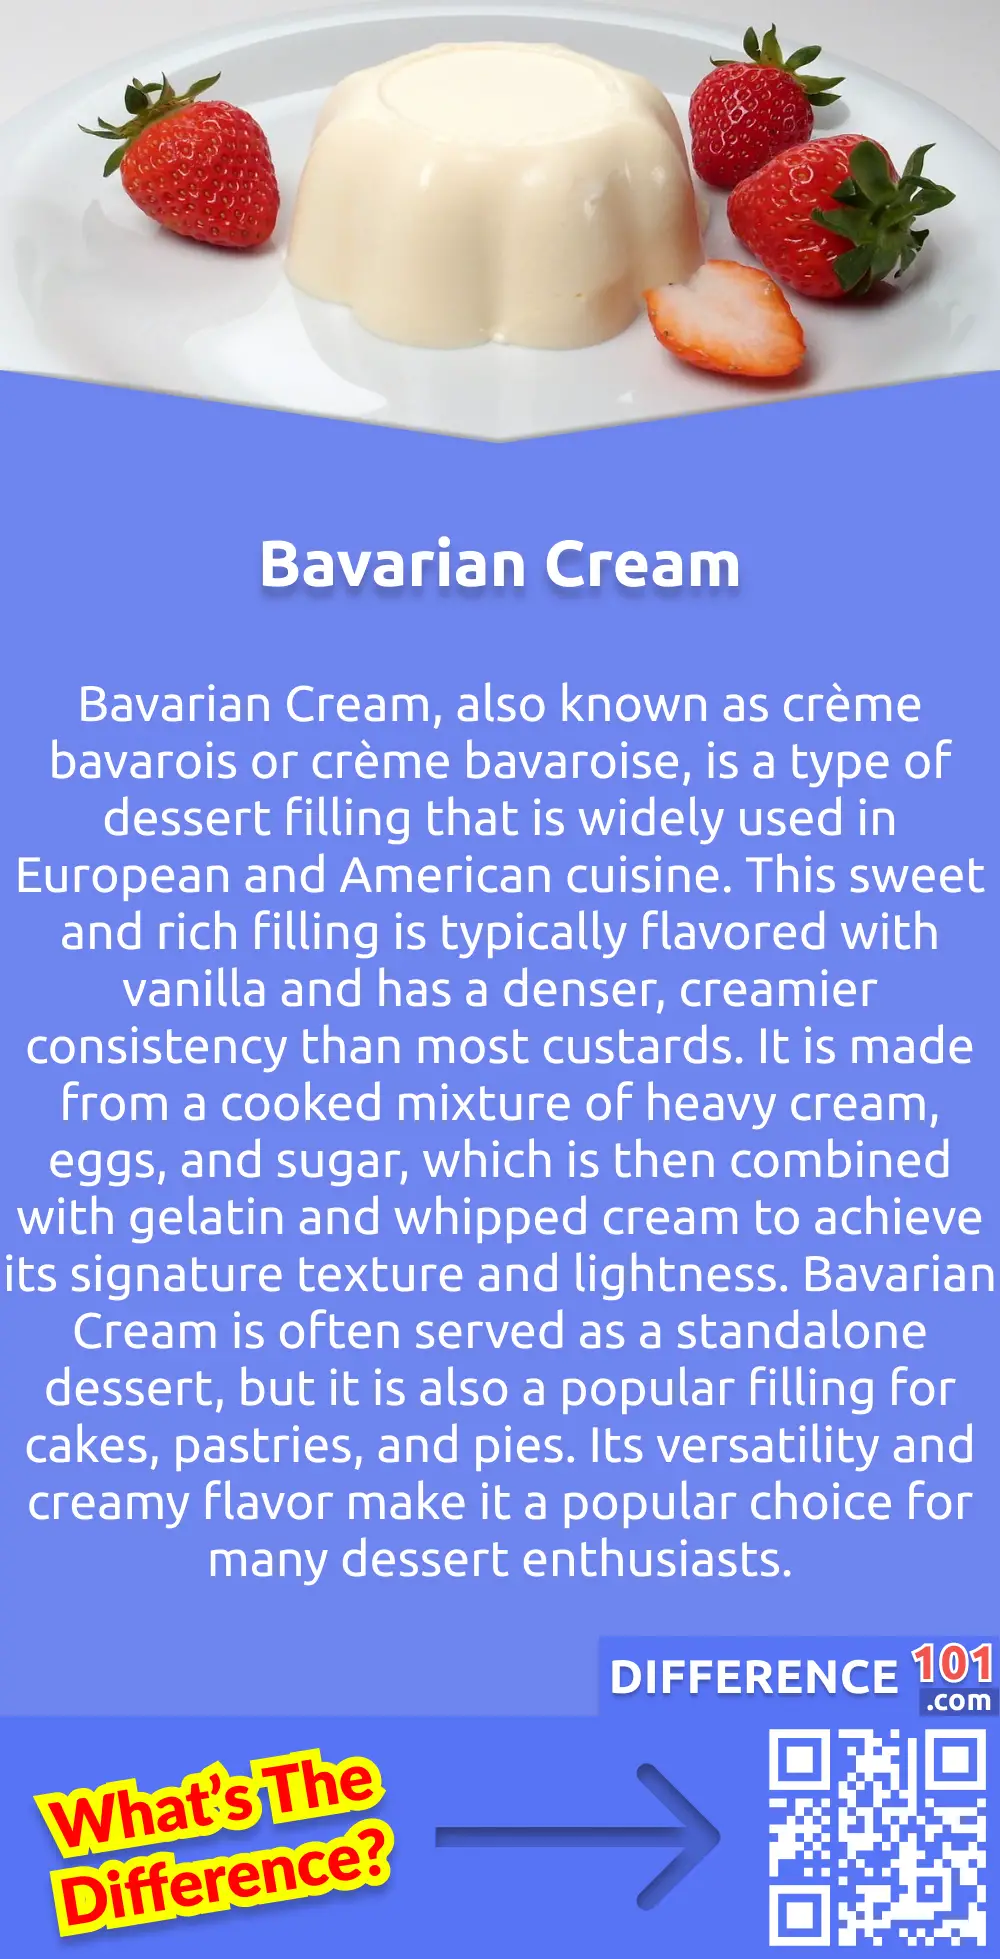 What Is Bavarian Cream? Bavarian Cream, also known as crème bavarois or crème bavaroise, is a type of dessert filling that is widely used in European and American cuisine. This sweet and rich filling is typically flavored with vanilla and has a denser, creamier consistency than most custards. It is made from a cooked mixture of heavy cream, eggs, and sugar, which is then combined with gelatin and whipped cream to achieve its signature texture and lightness. Bavarian Cream is often served as a standalone dessert, but it is also a popular filling for cakes, pastries, and pies. Its versatility and creamy flavor make it a popular choice for many dessert enthusiasts.
